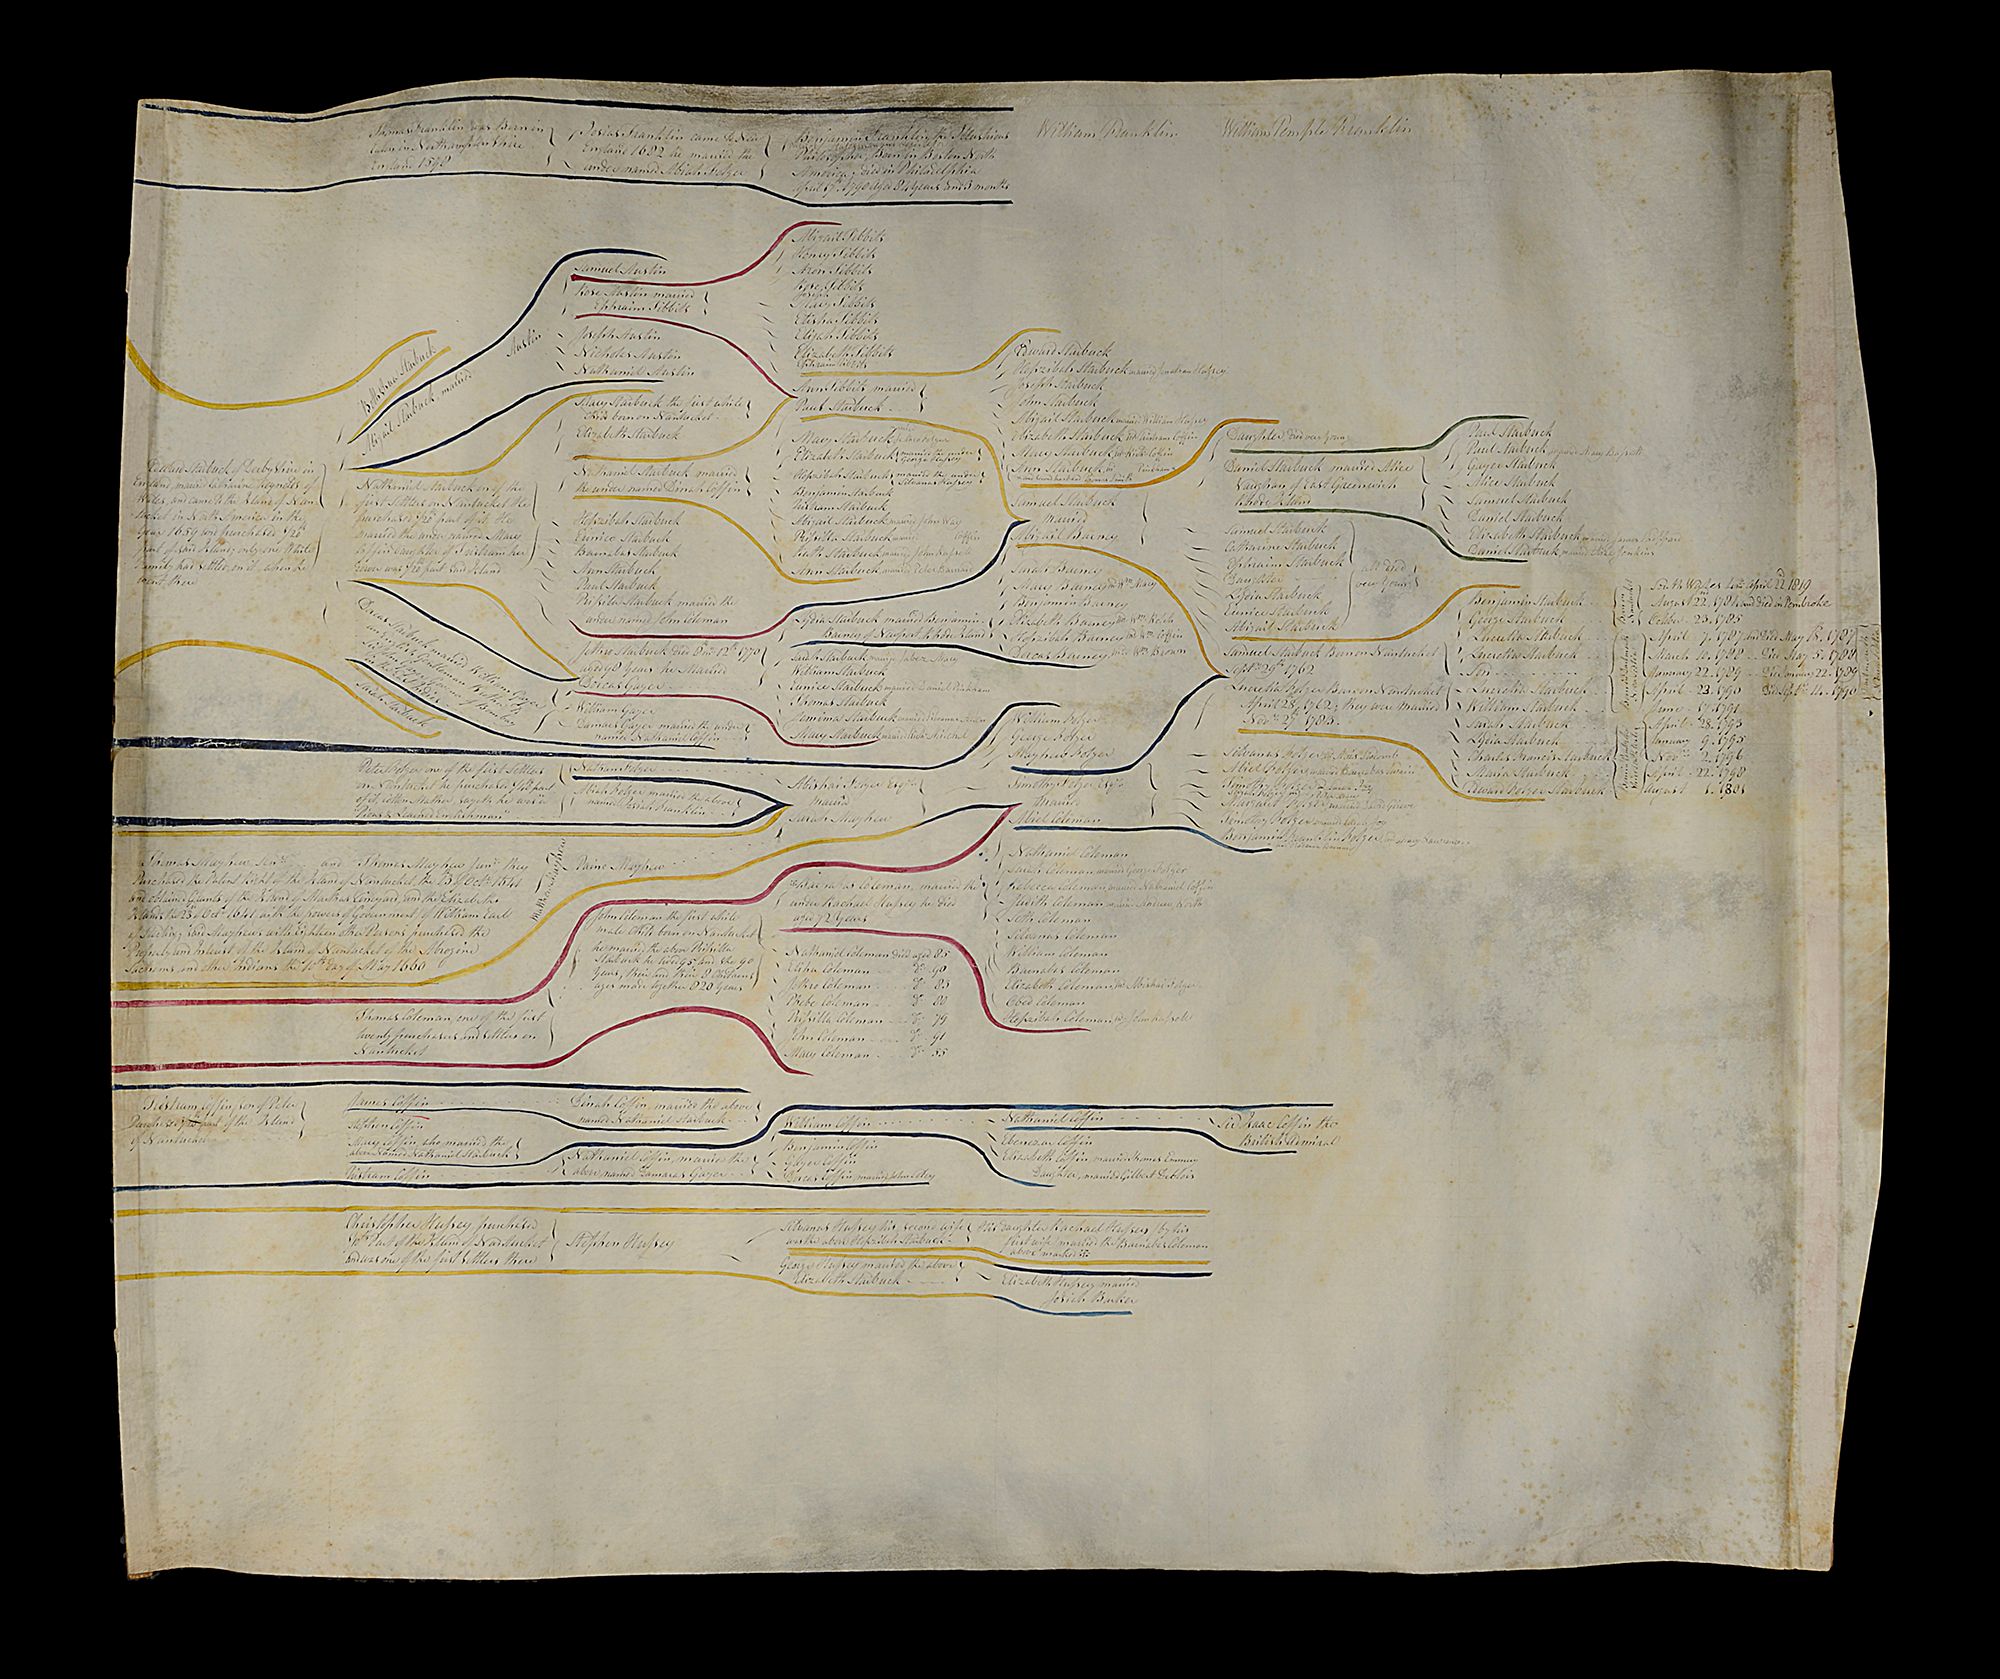 late 18th/early 19th century manuscript family trees relating to the Starbuck, Coffin, Wolger and Ma